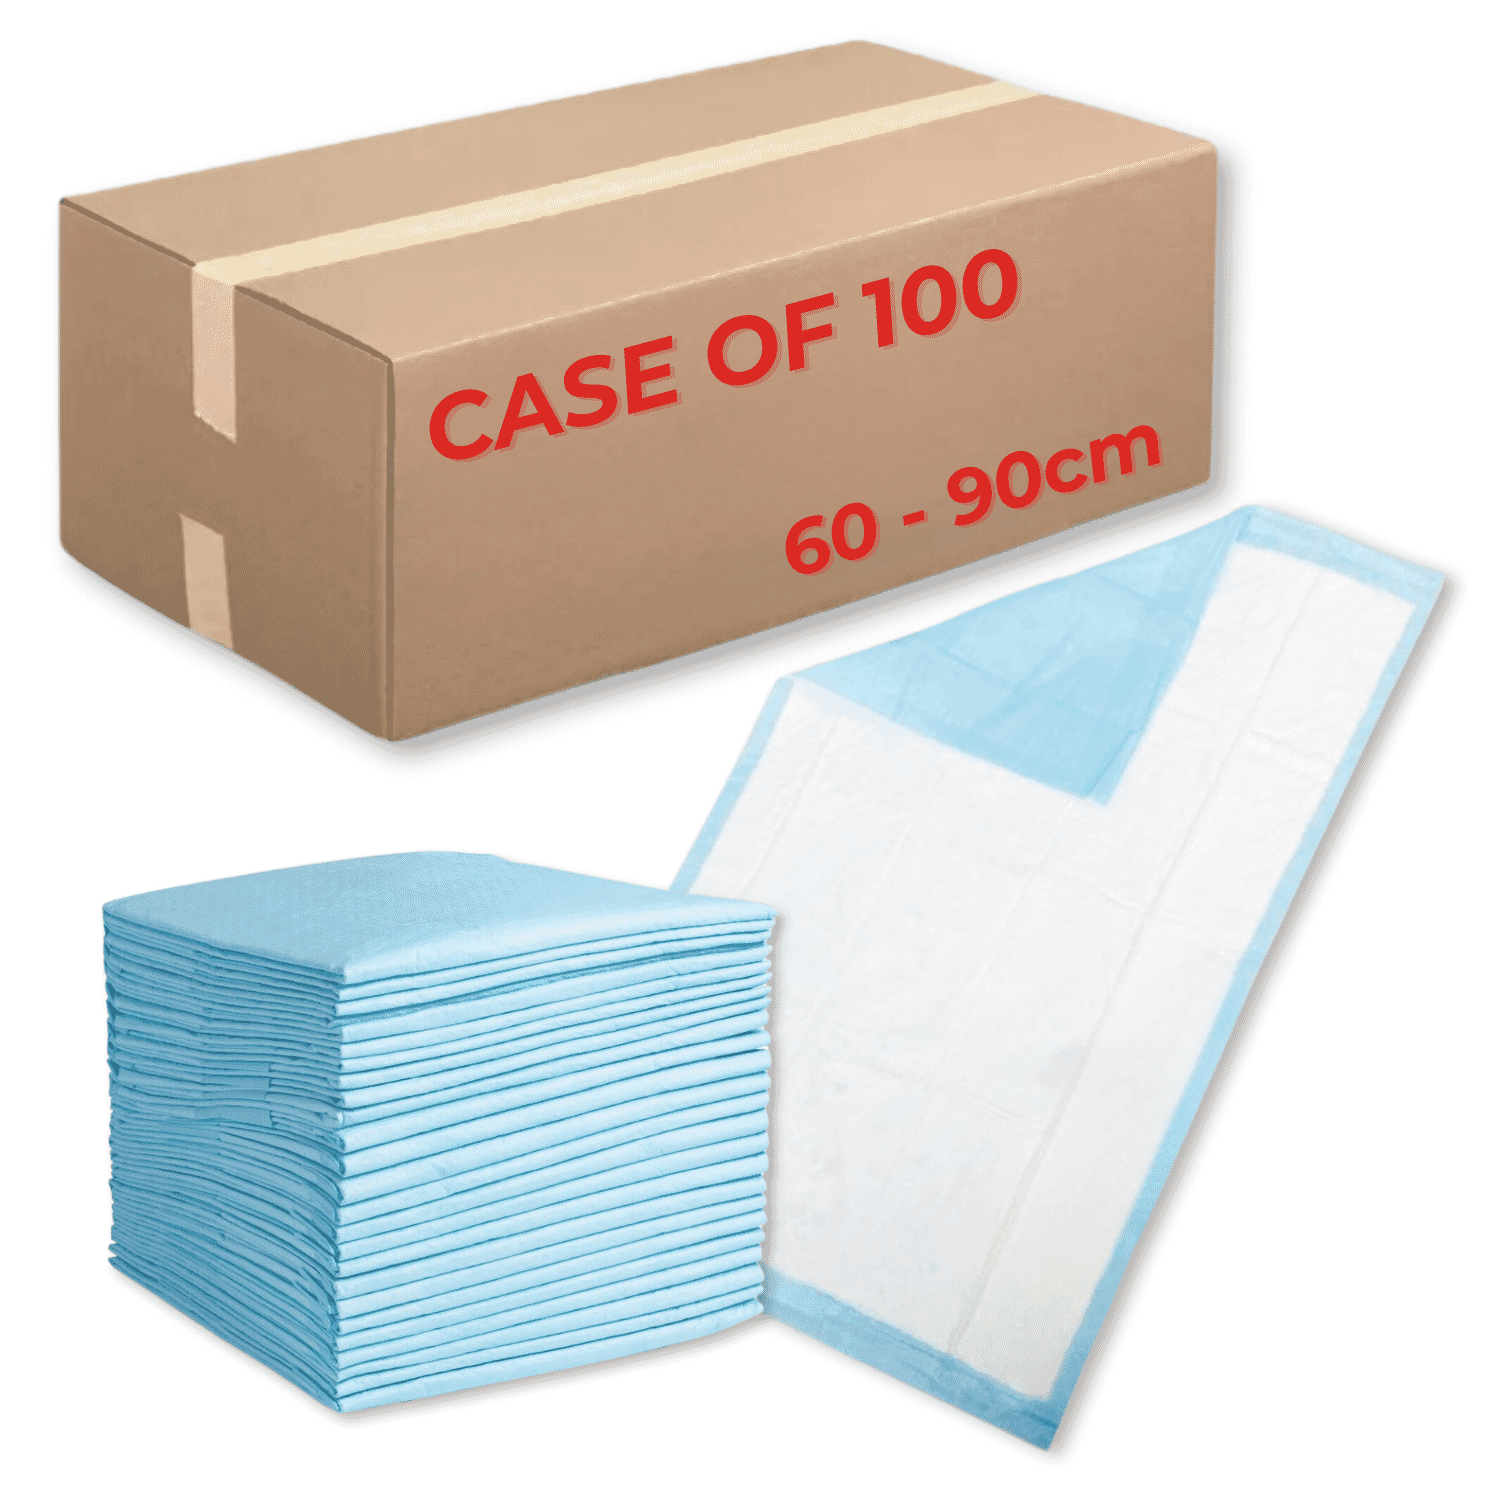 View Disposable Bed Pads 60cm x 90cm Case of 100 information